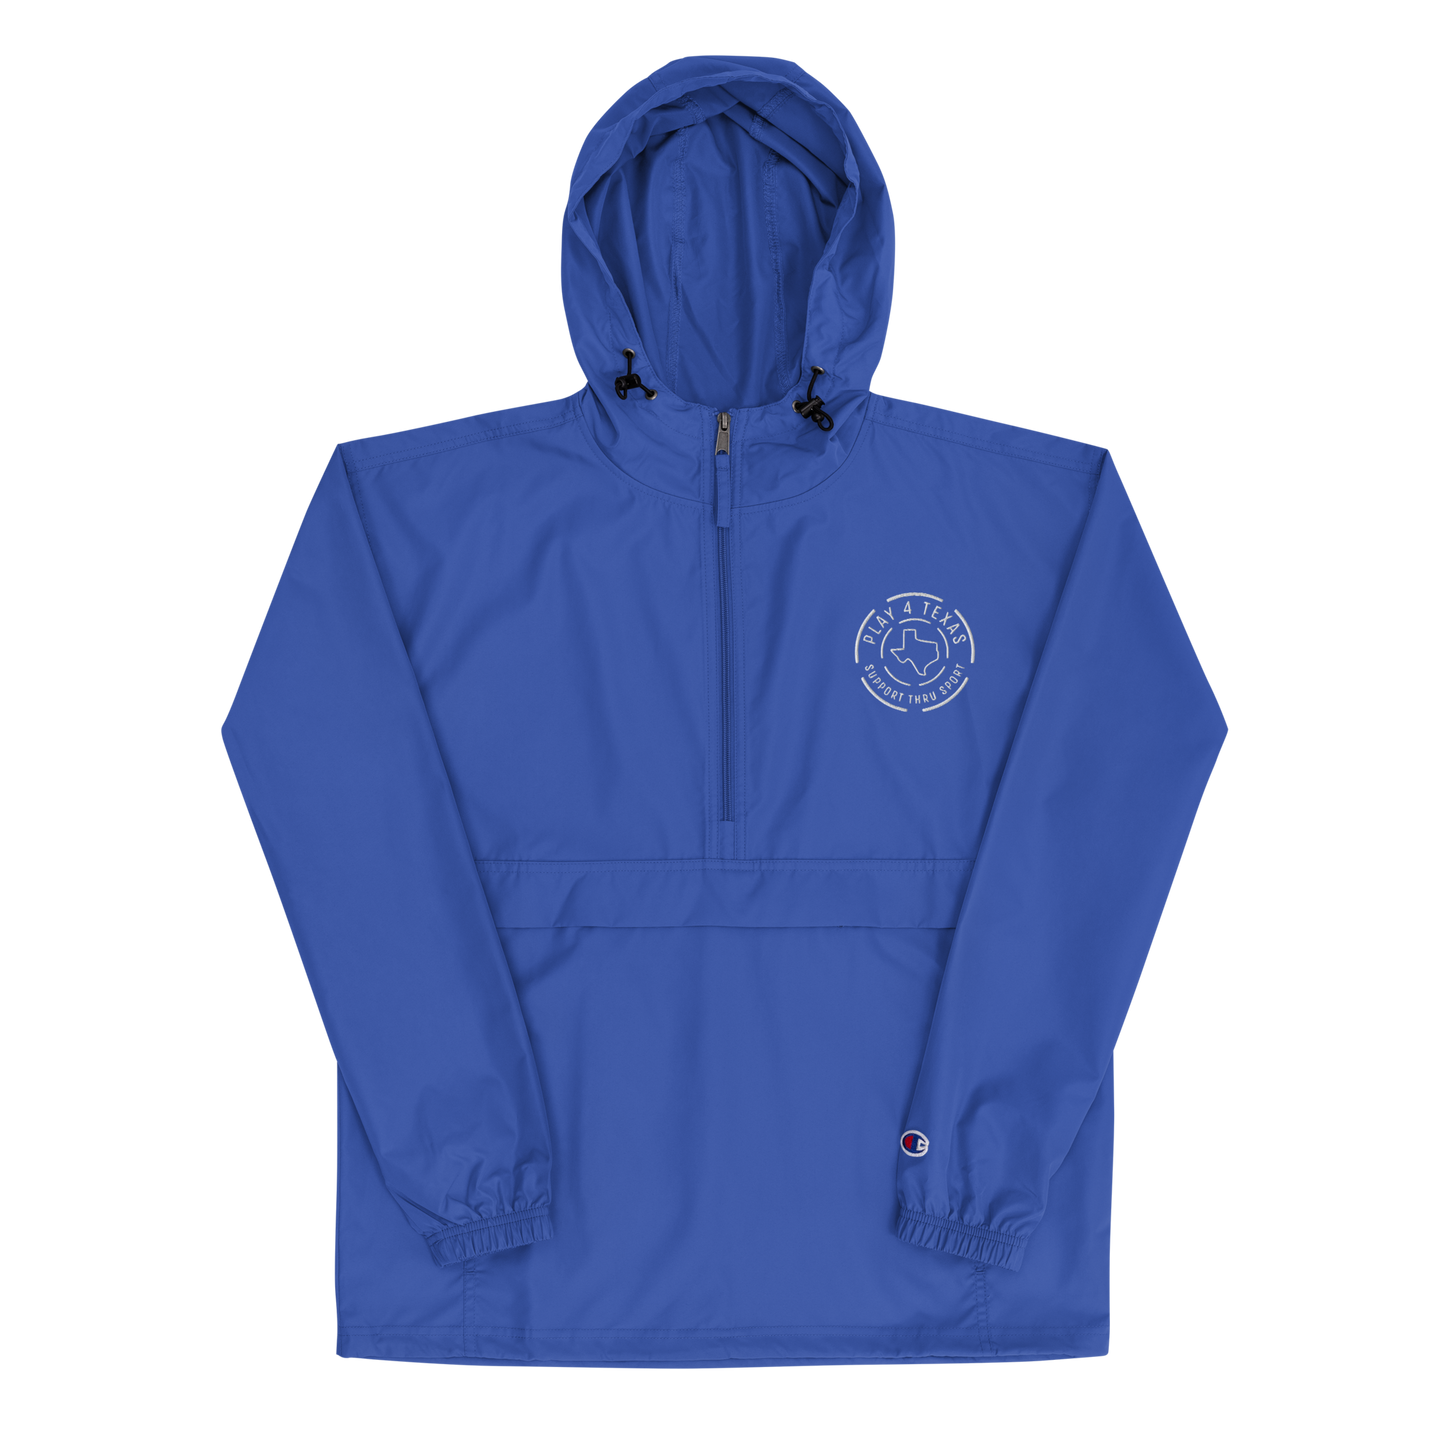 PLAY 4 TEXAS EMBROIDERED CHAMPION JACKET